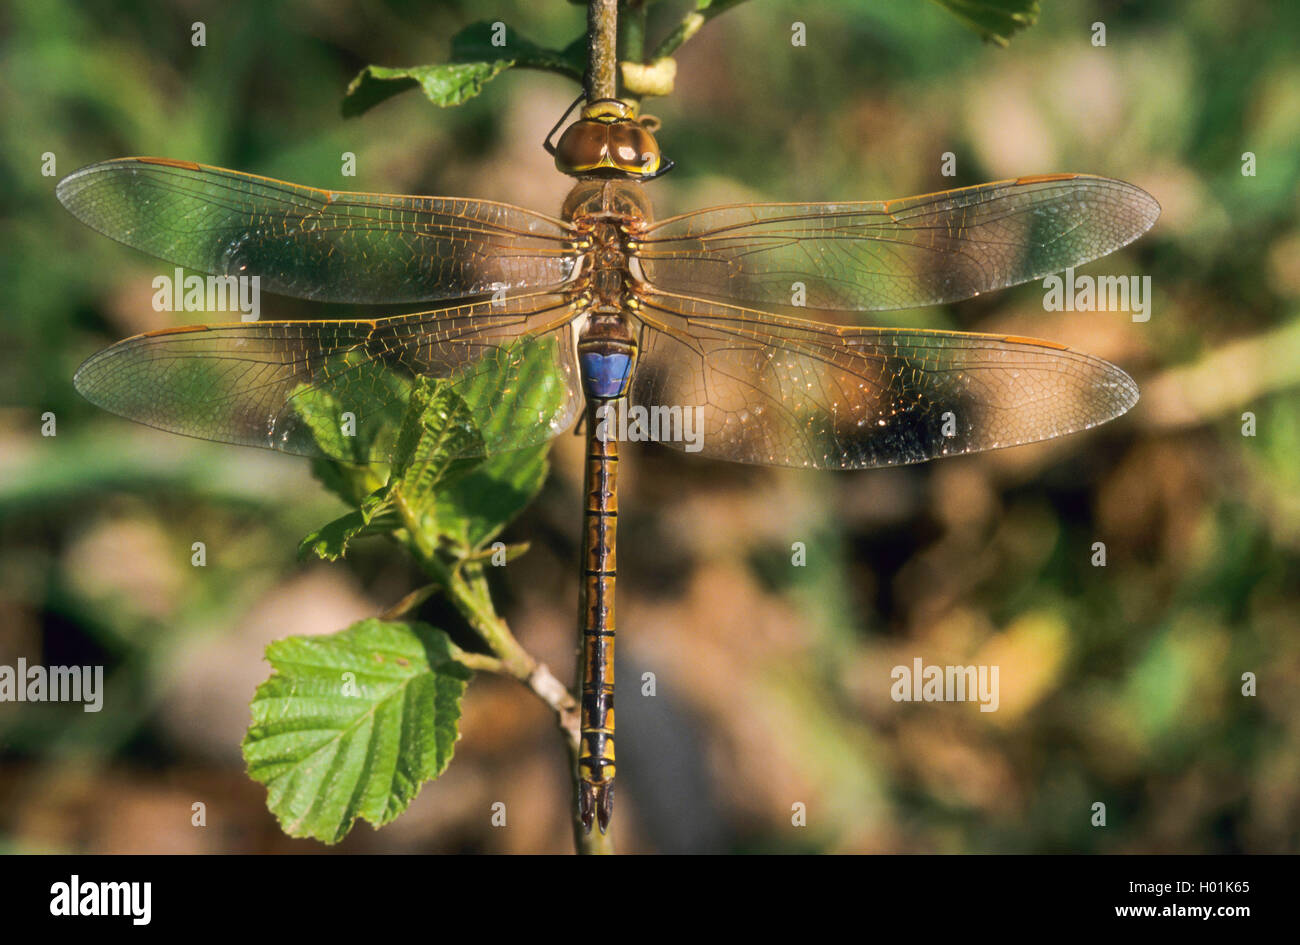 Vagrant emperor dragonfly, Vagrant emperor (Anax ephippiger, Hemianax ephippiger), male on a twig, view from above, Germany Stock Photo